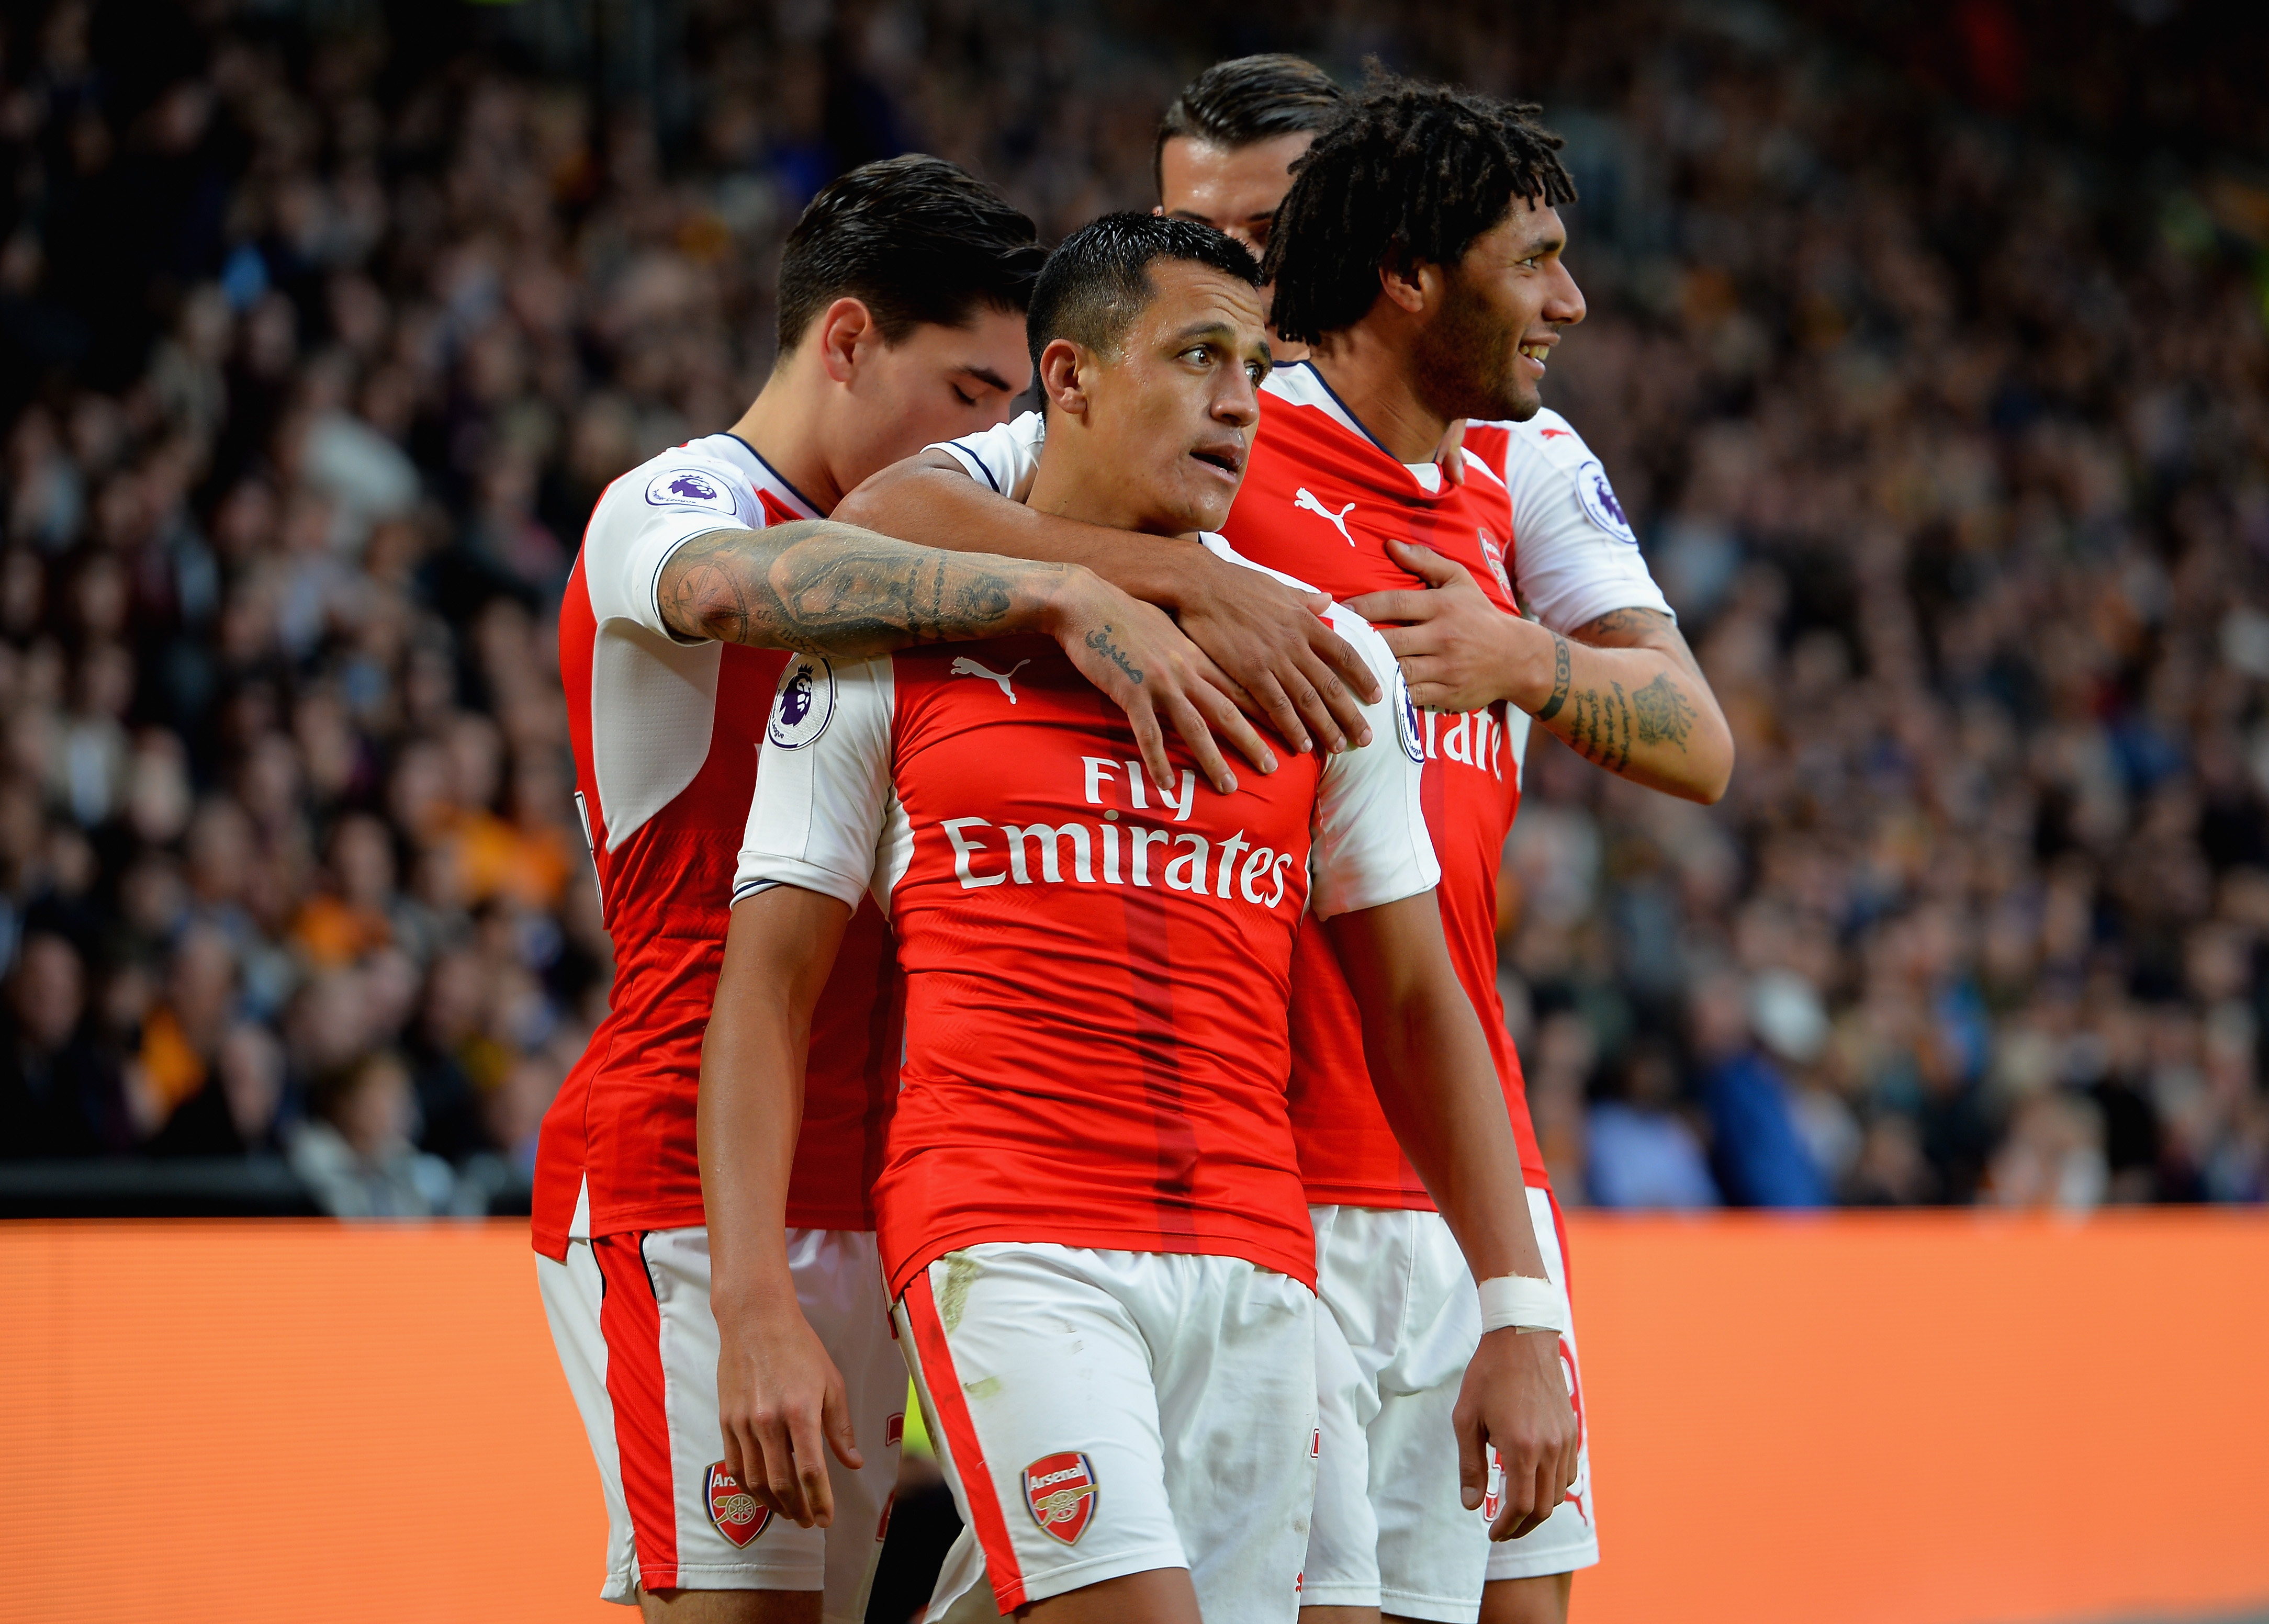 Arsenal-Chelsea Live Stream How to Watch Online for Free Heavy